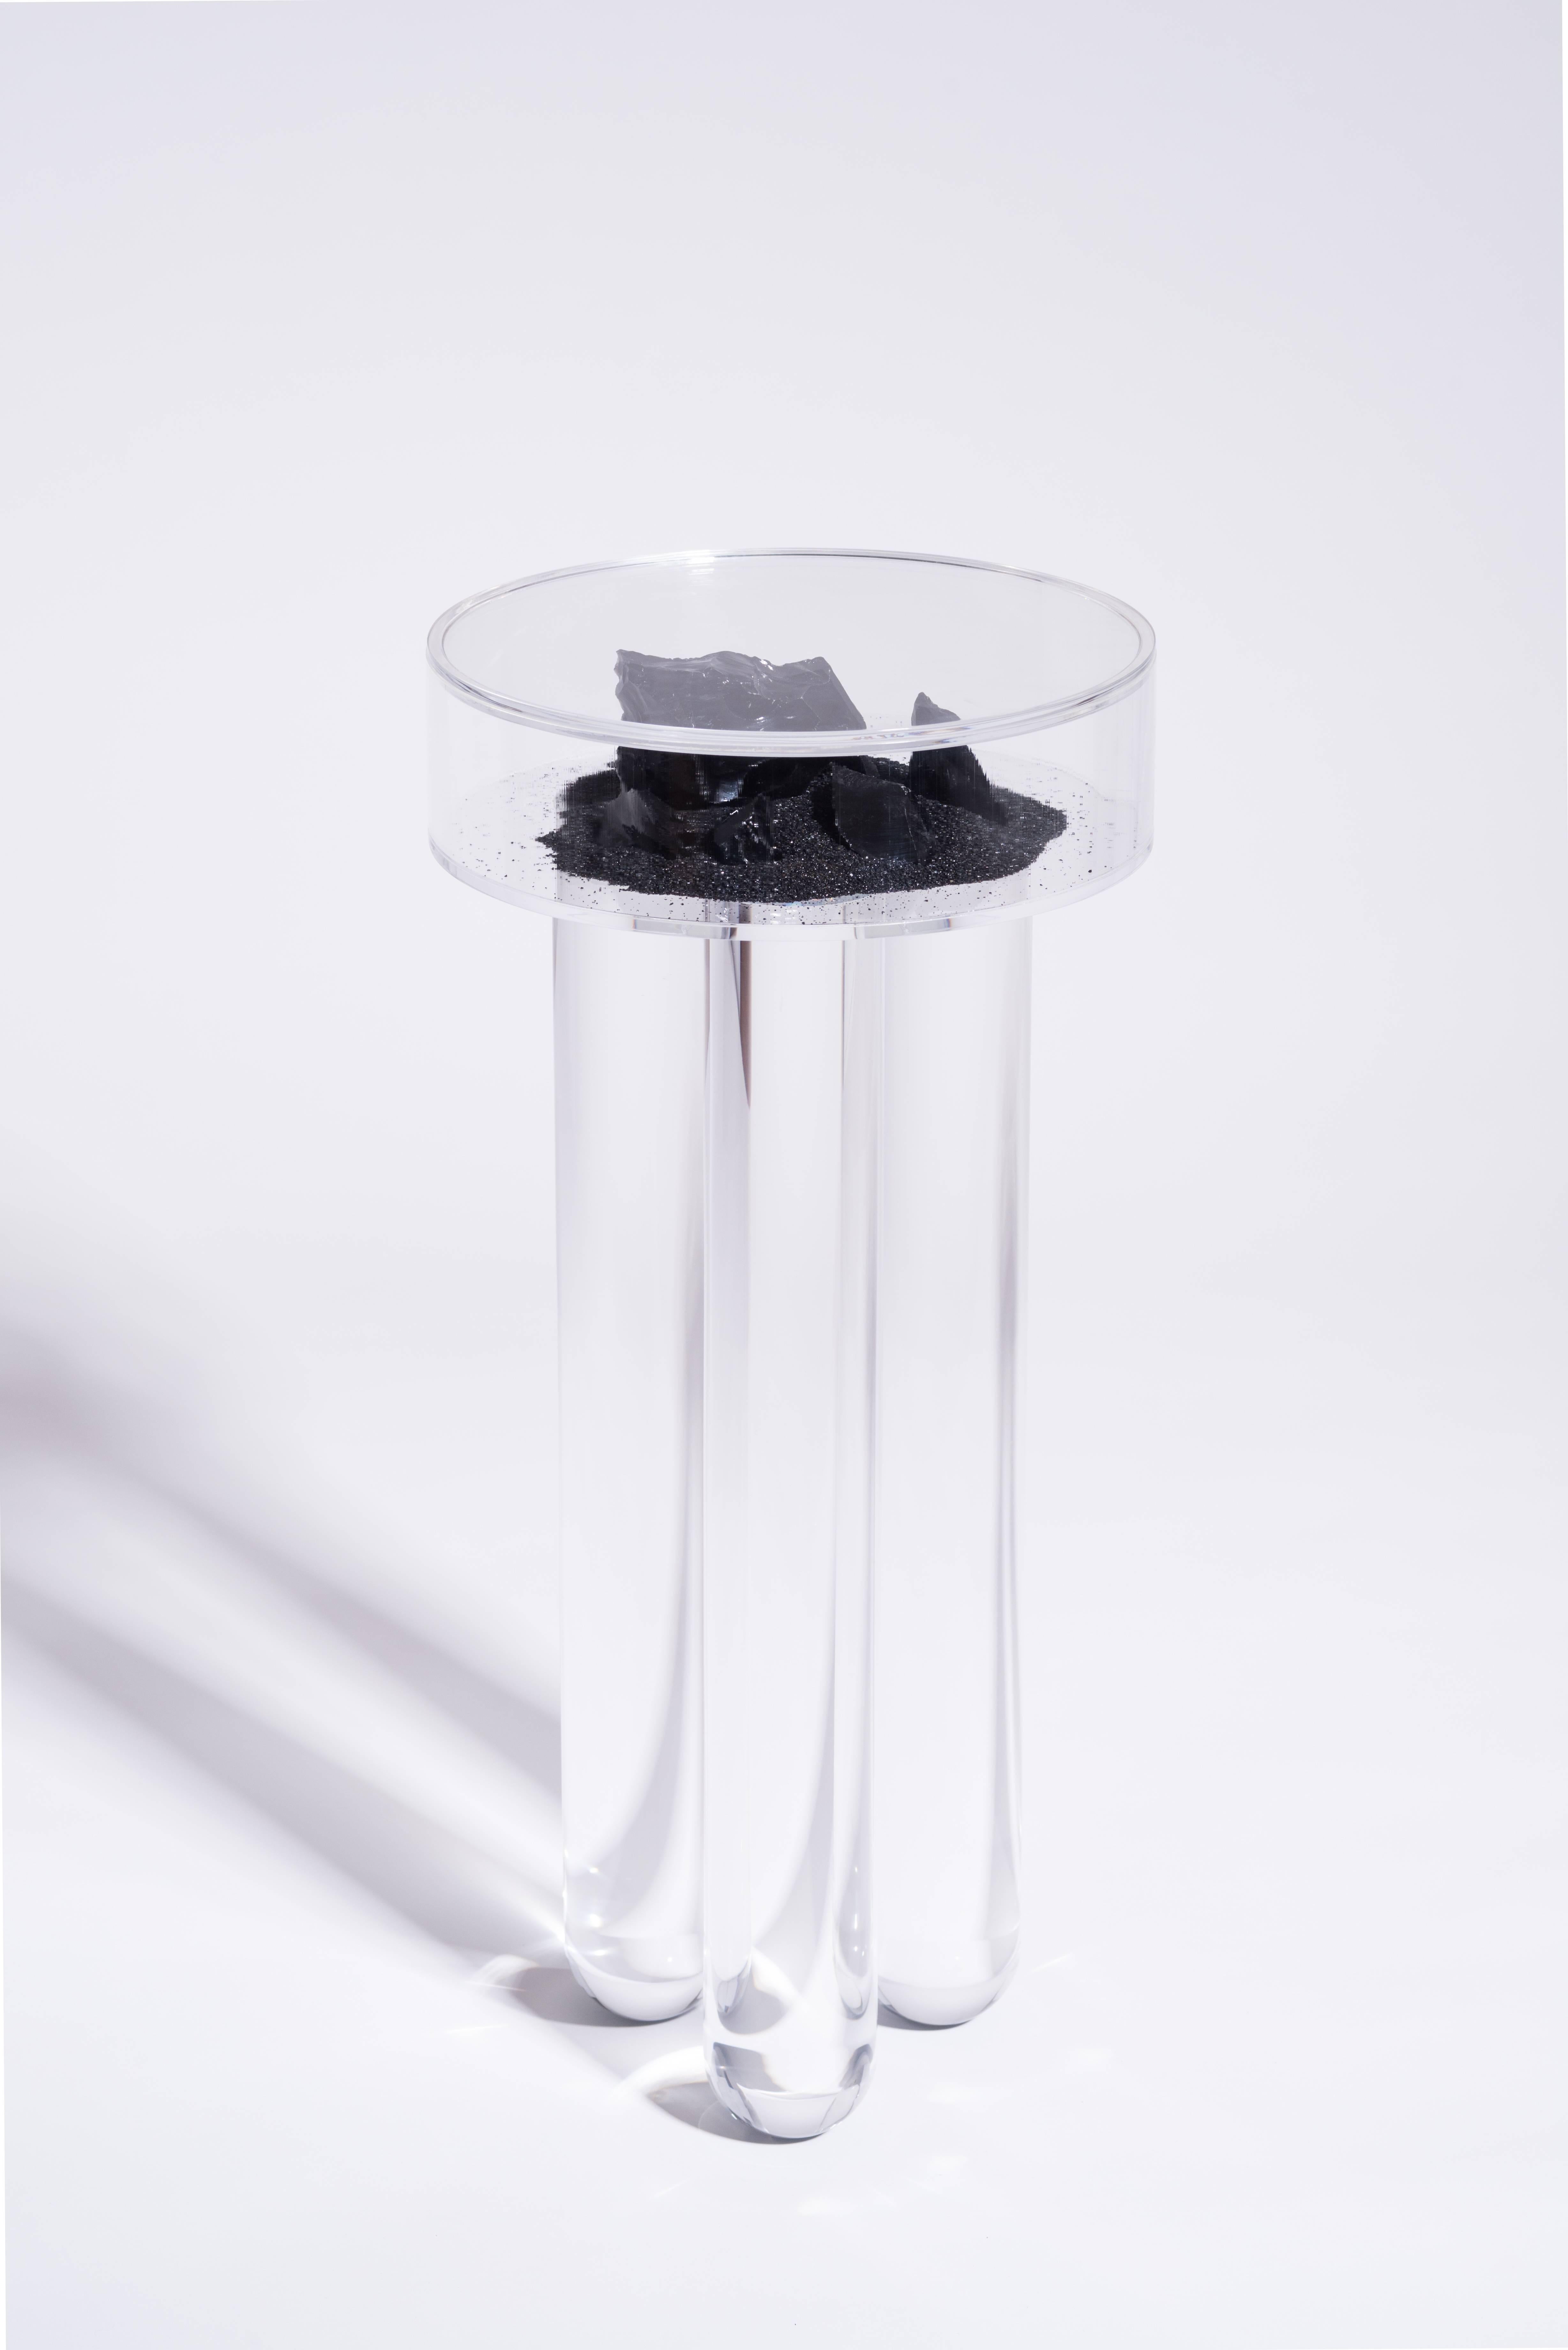 Juxtaposing beautiful natural minerals inside a man-made acrylic box, the Vacation table allows viewers to enjoy the souvenirs of going on a vacation without leaving their living room. The dark version carries black sand and Mexican obsidian, while